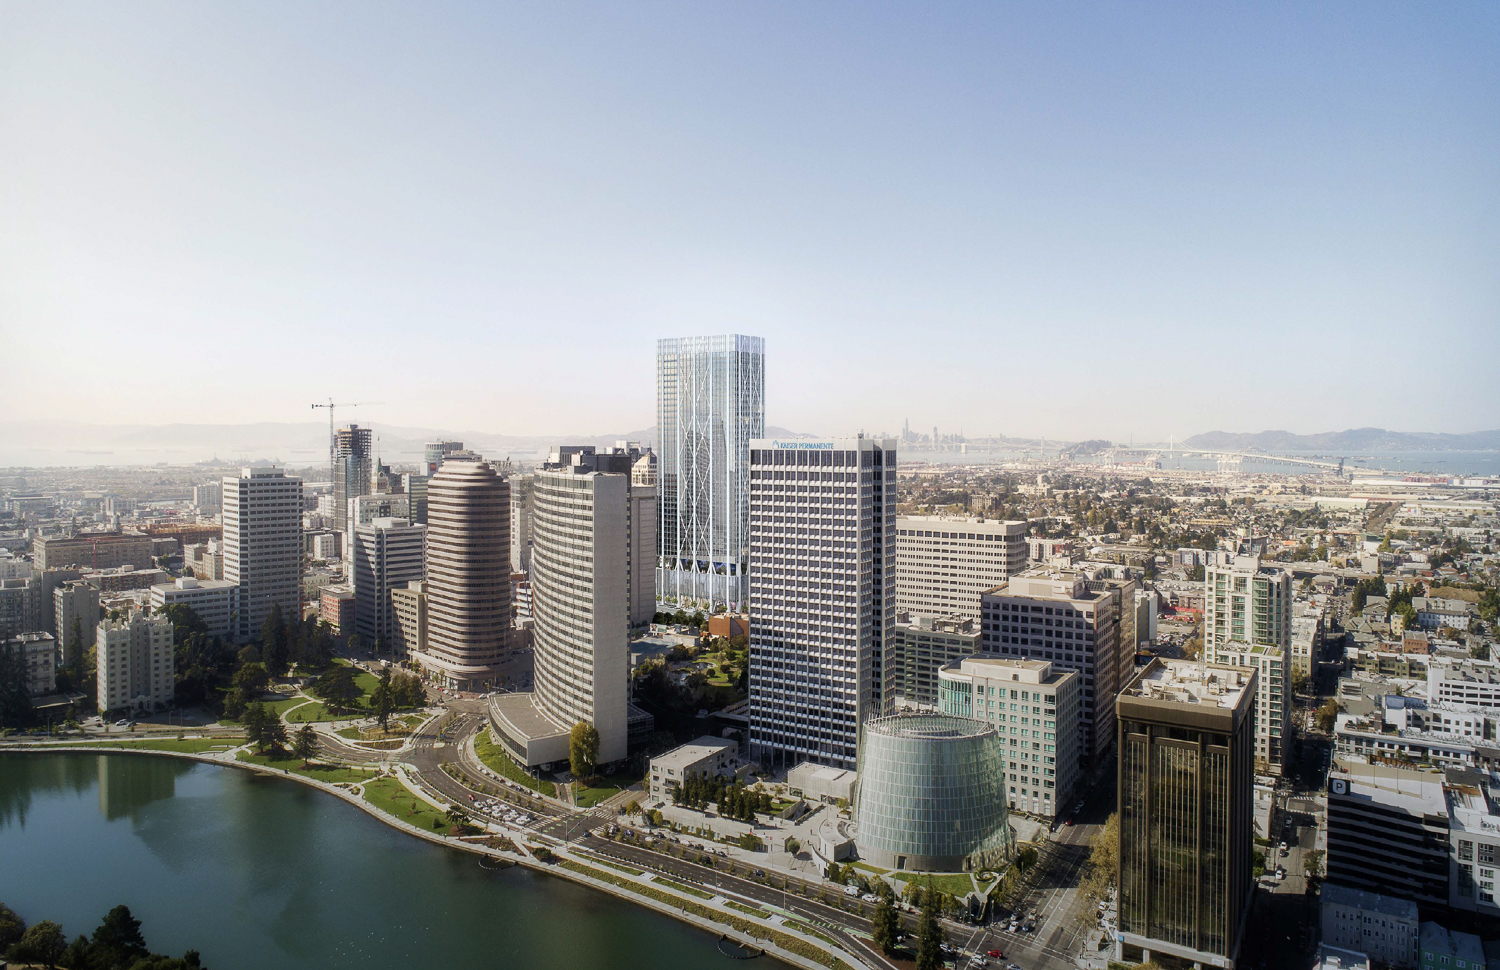 415 20th Street in the Oakland downtown skyline, rendering from Hines